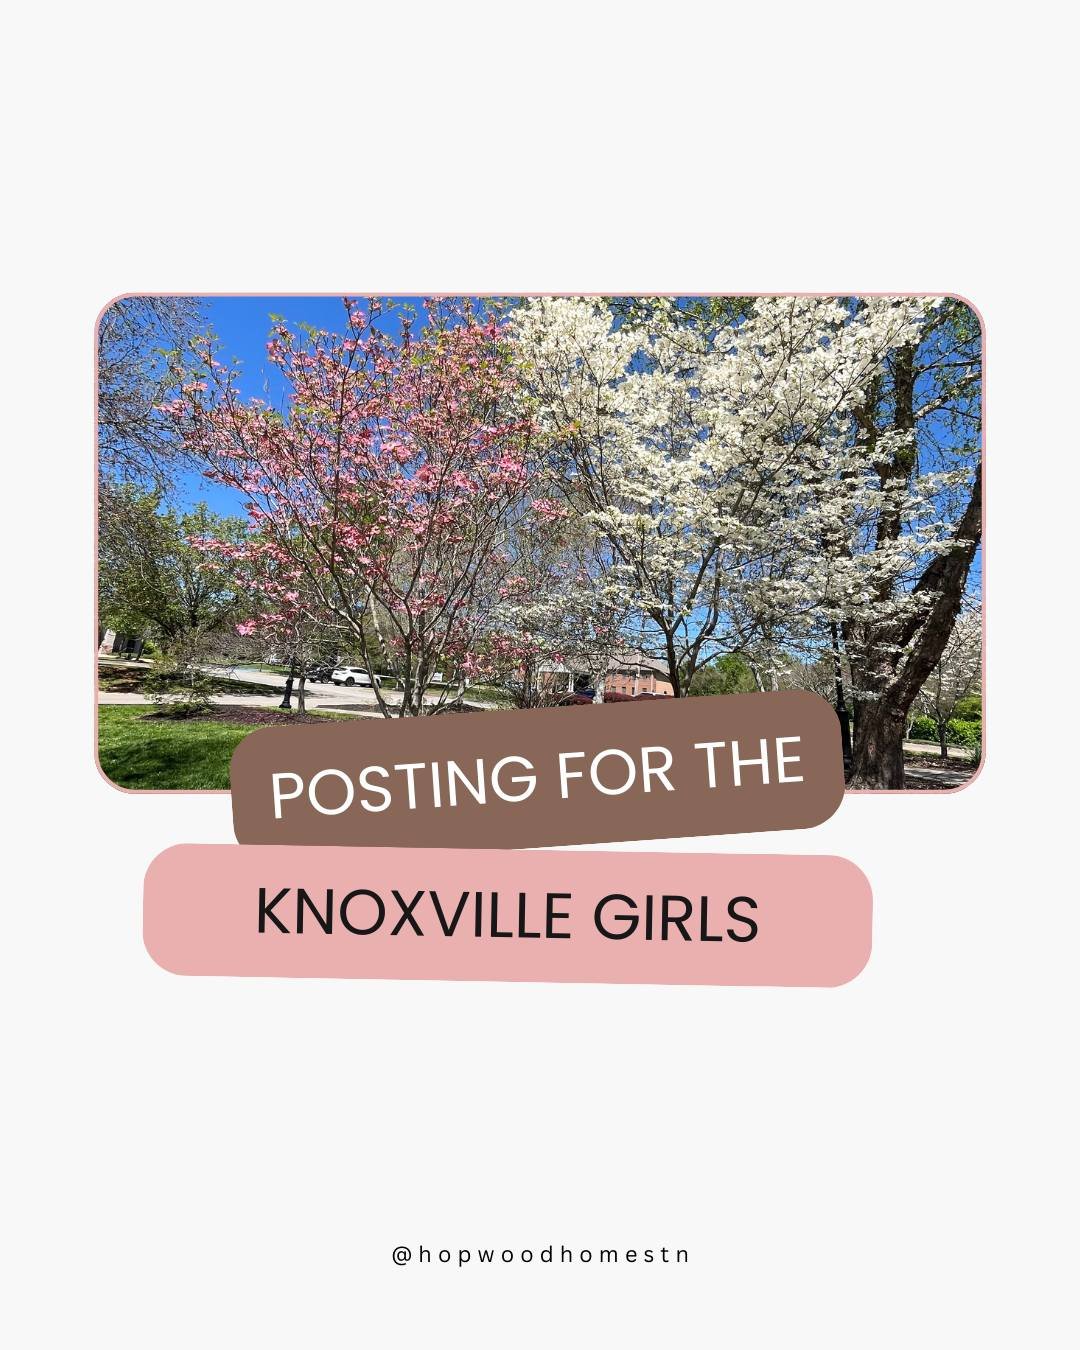 Just going to keep posting until all the Knoxville girls hit that follow button because they are brave enough to believe they could actually become a homeowner.

Because if even *one* of you takes the leap and pursues homeownership this year, it will